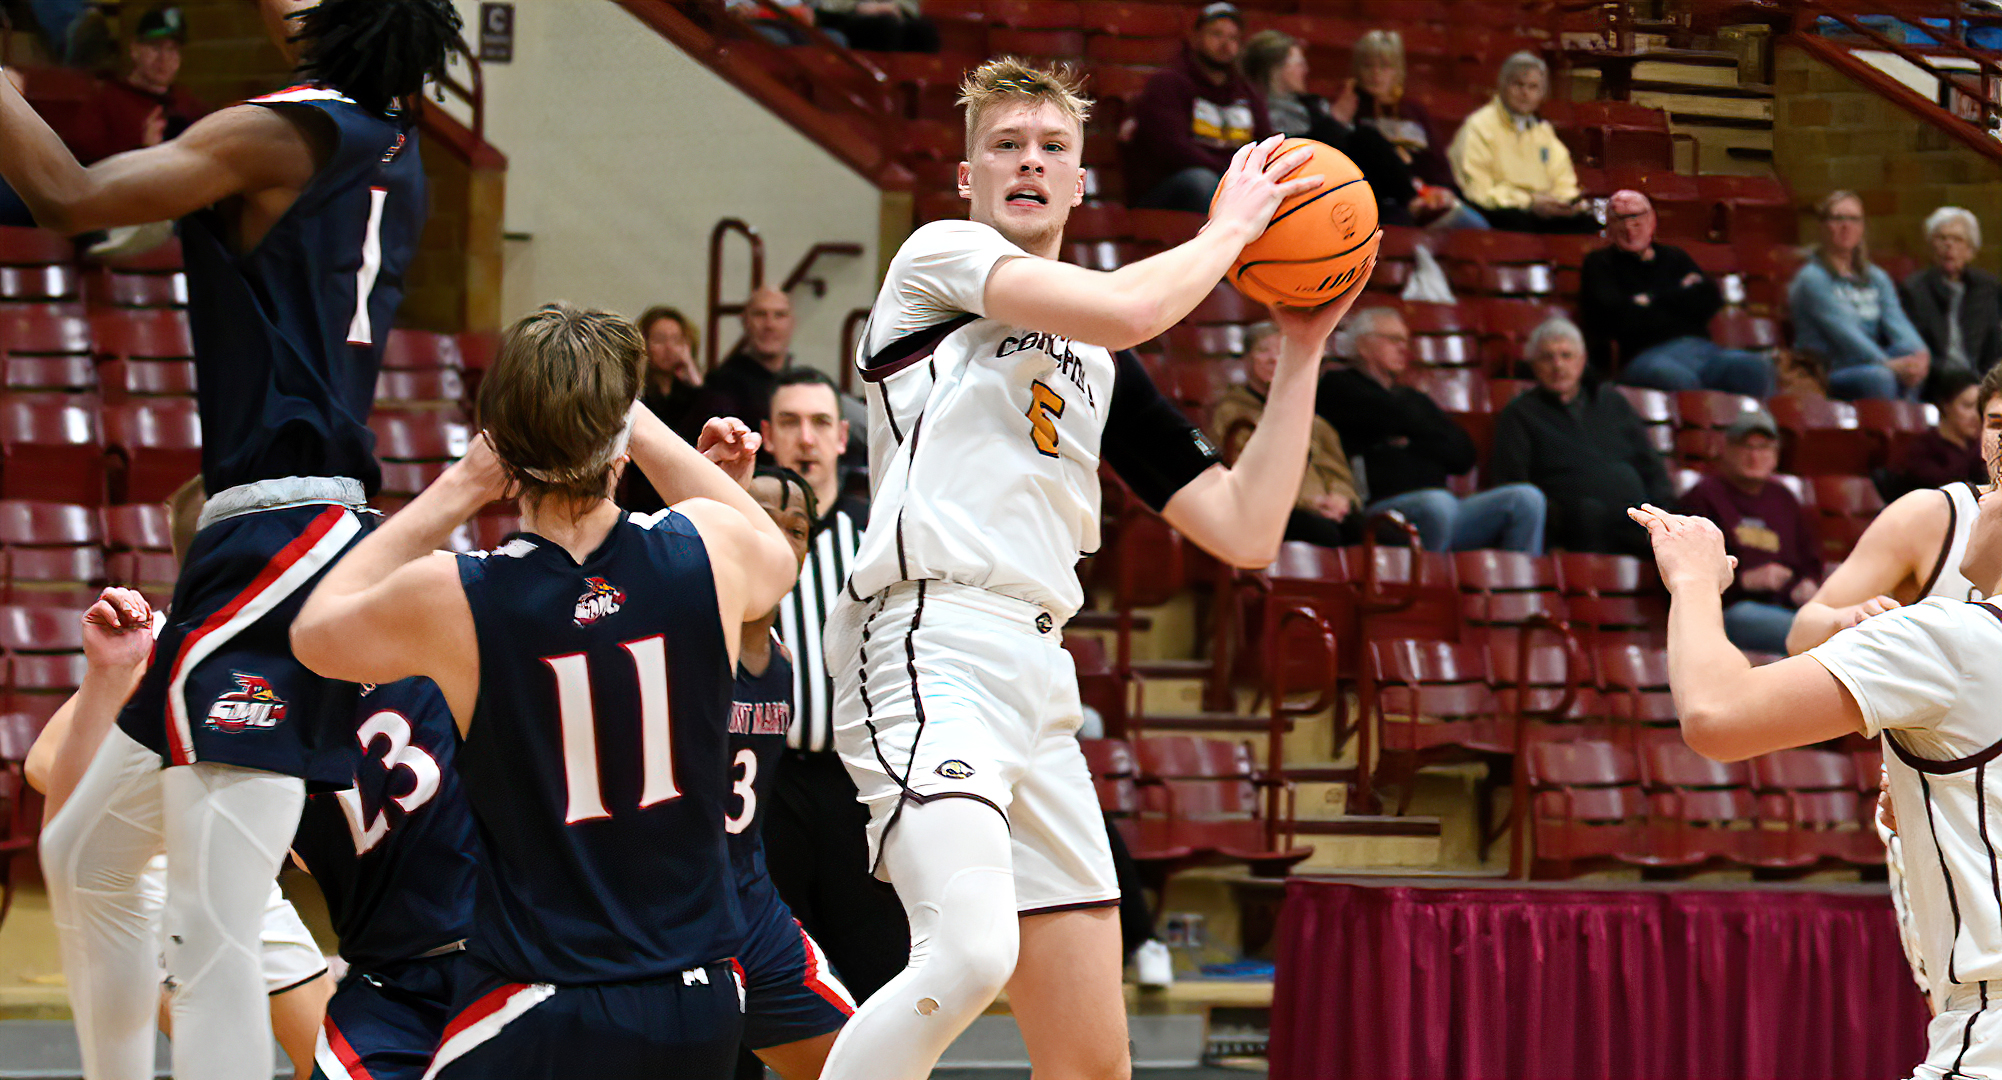 Junior Noah Christensen grabs one of his career-high 11 rebounds in the Cobbers 72-58 win over St. Mary's.